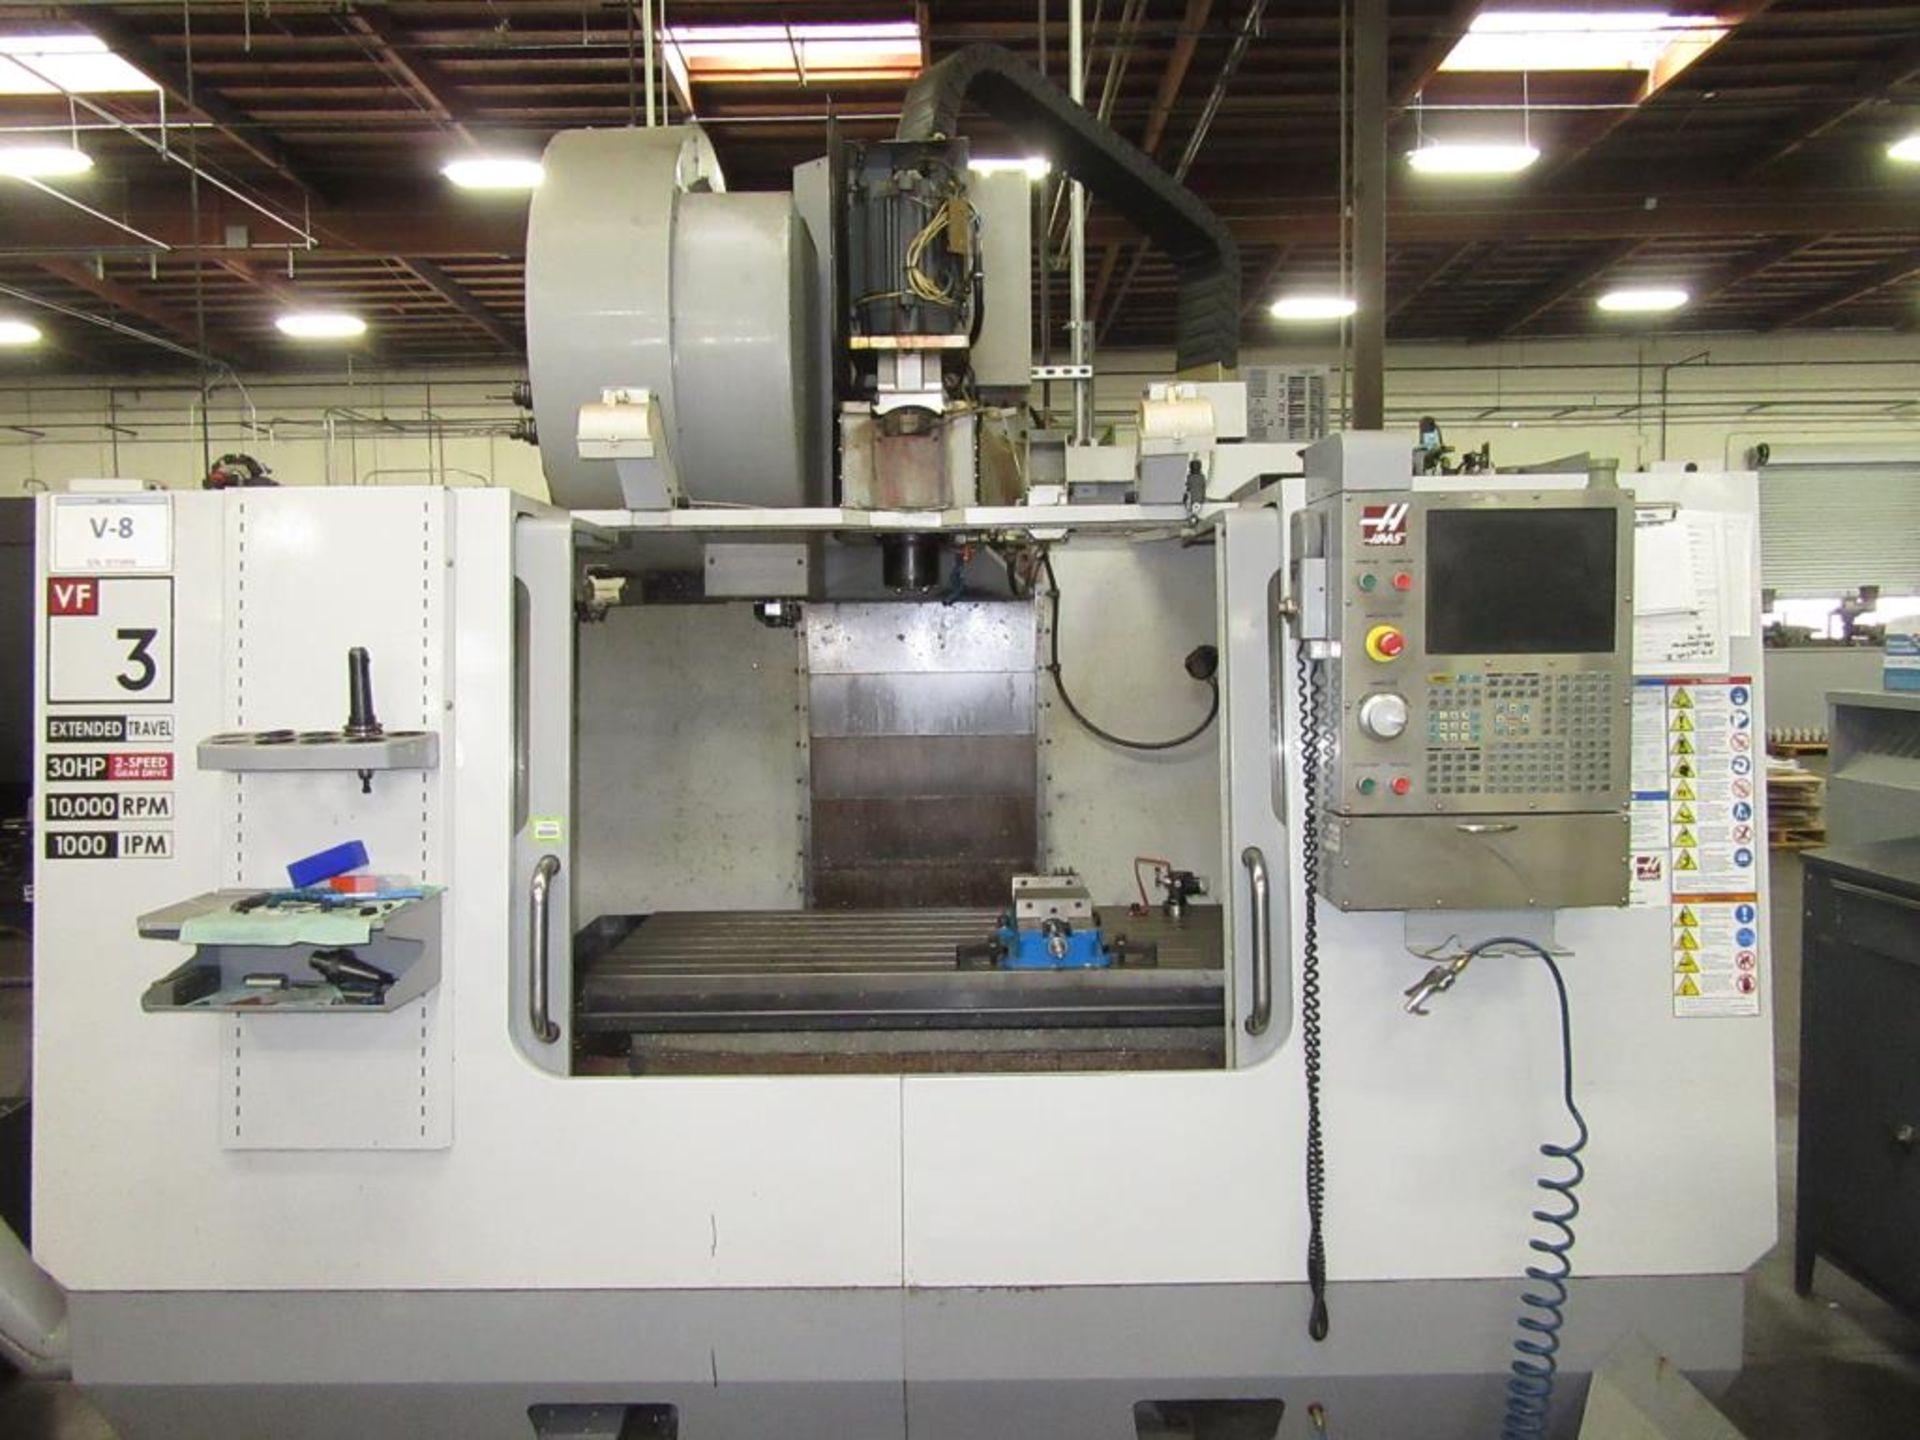 Haas VF-3BYT. 2008 - CNC Vertical Machining Center with Haas 3-Axis Control Panel, Table Size 54"L x